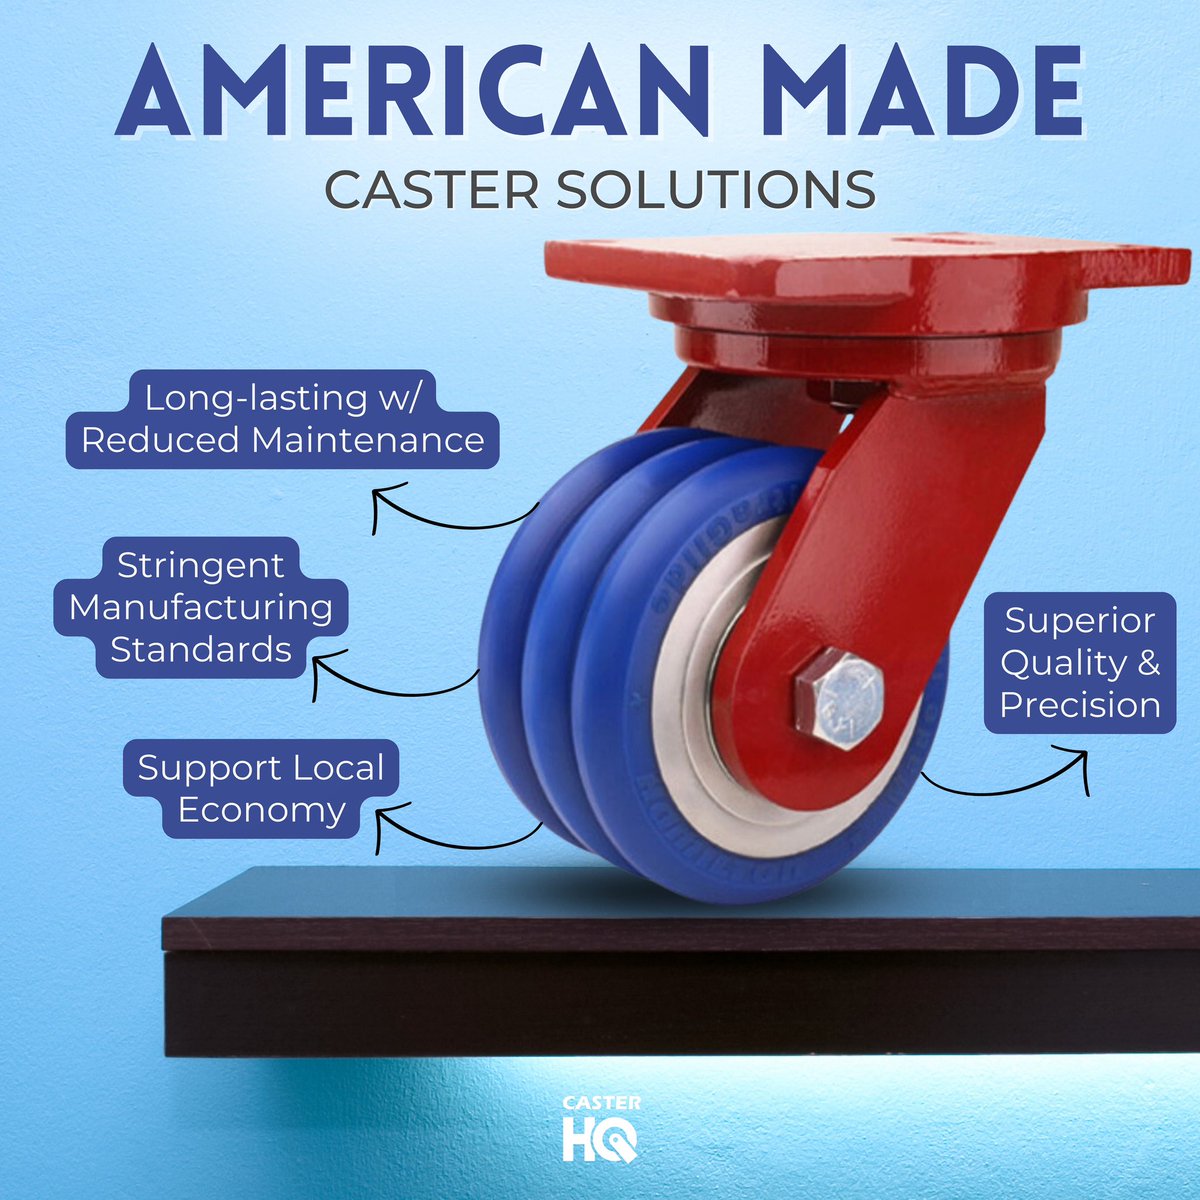 🇺🇸 Why Choose American-Made Casters? Quality matters! Opt for top-notch craftsmanship, stringent manufacturing standards, and long-lasting durability. Support your local economy too! When searching for casters, wheels, or material handling equipment, consider the benefits of